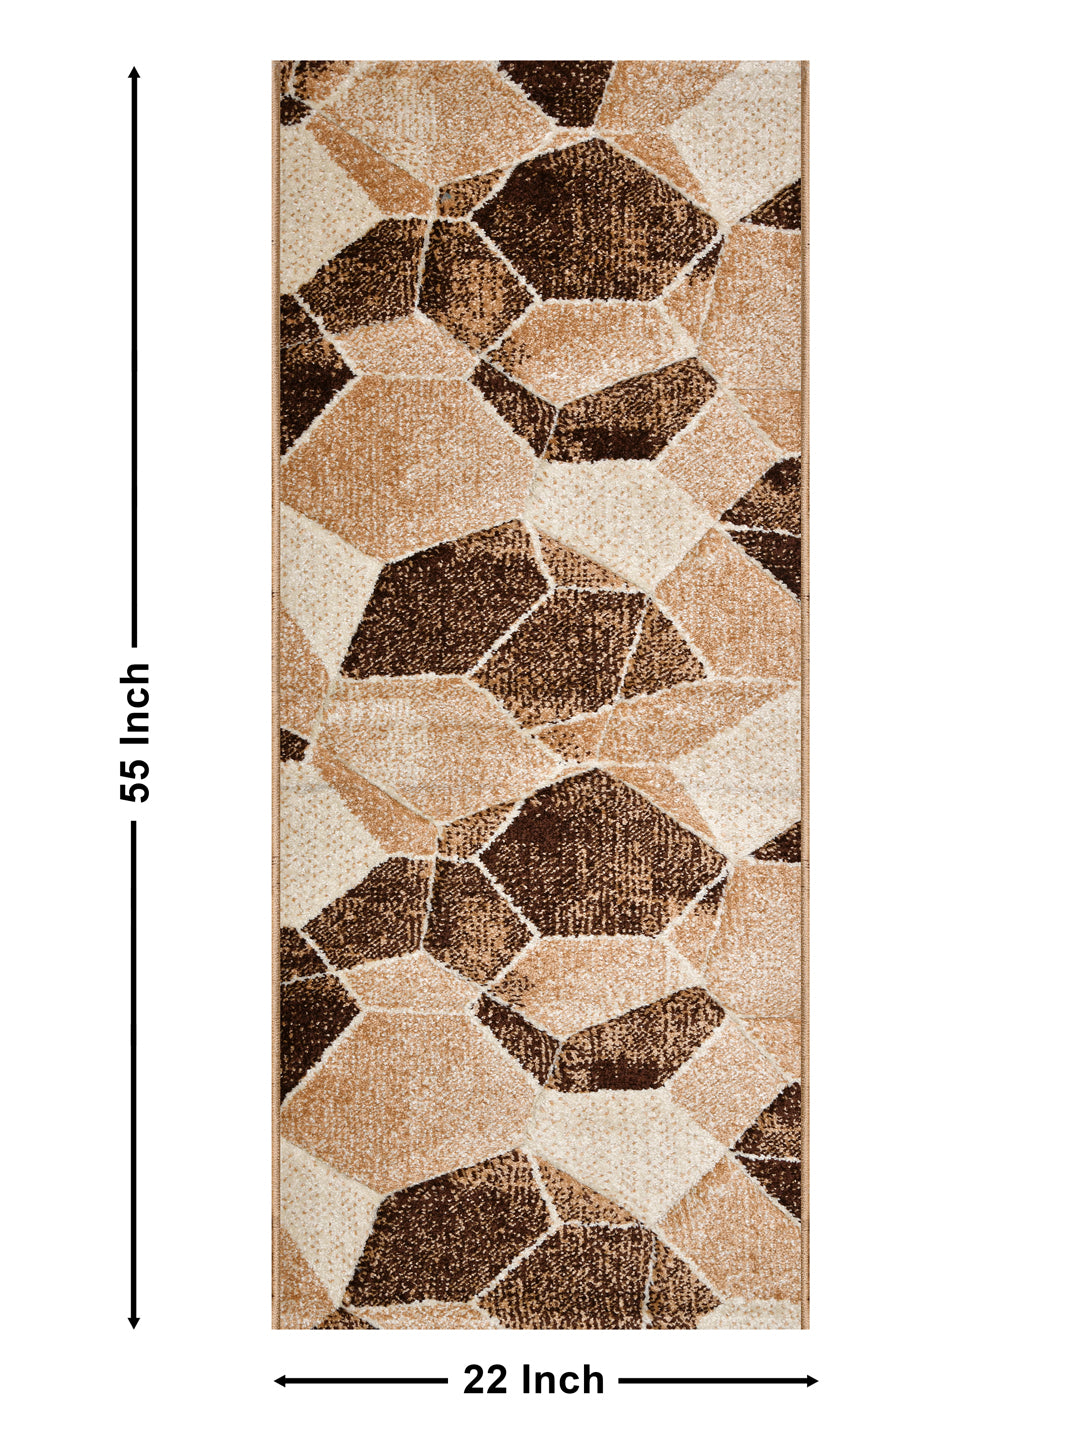 Bedside Runner Carpet Rug With Anti Skid Backing; 57x140 cms; Beige Brown Triangles